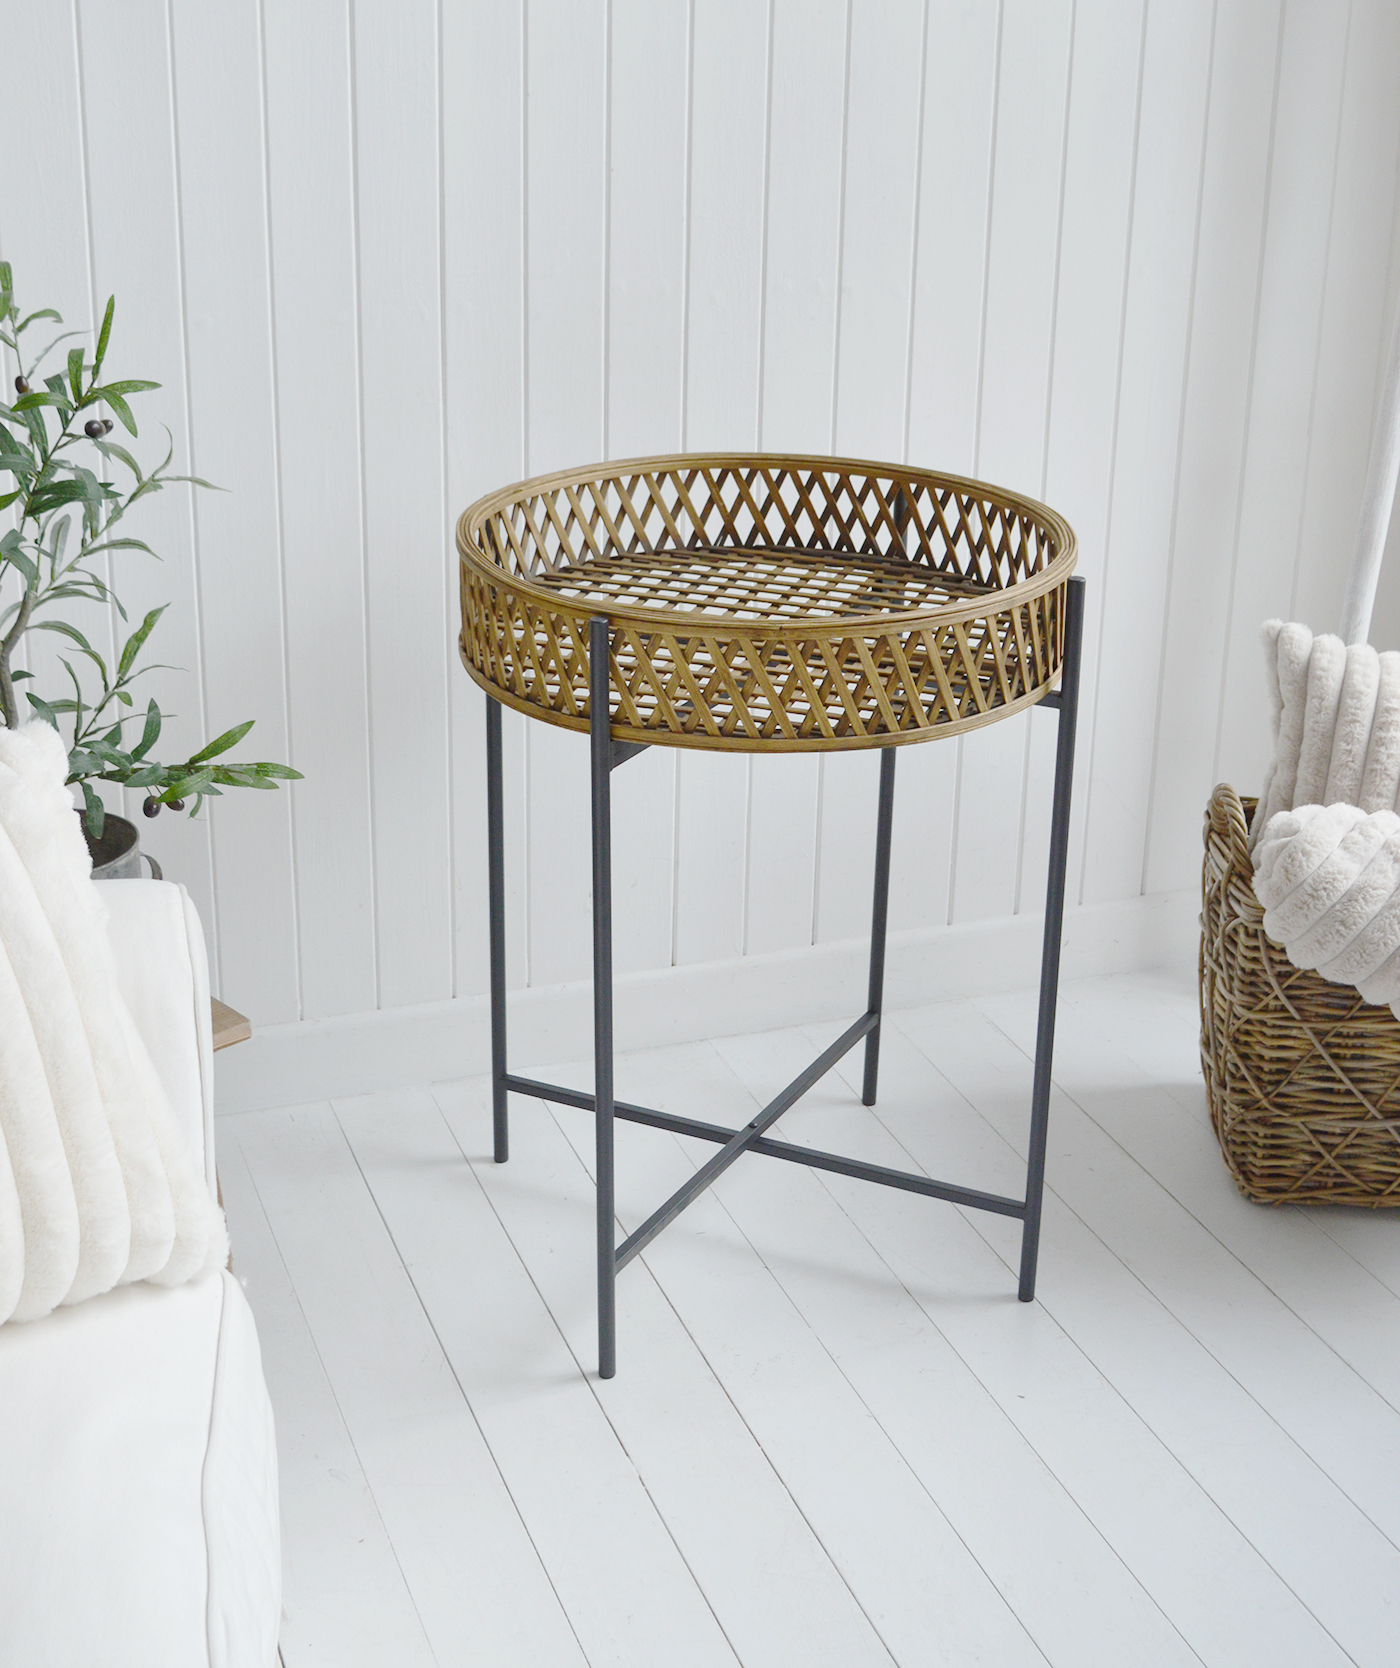 Brentwood Lamp Table. Elegant New England Coastal and Country Furniture.  A rattan and iron table with textural tray top, perfect as a piece in the living room or bedroom of coastal and modern farmhouse New England interiors